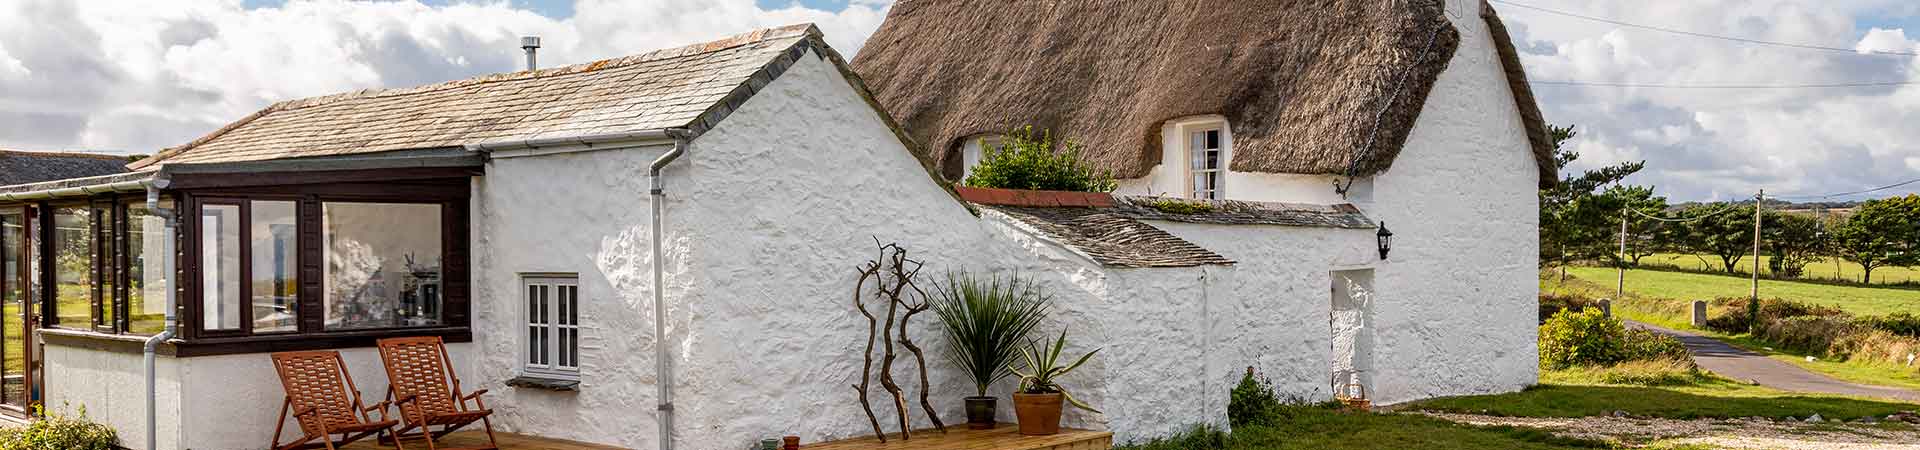 Thatched holiday cottages in South West